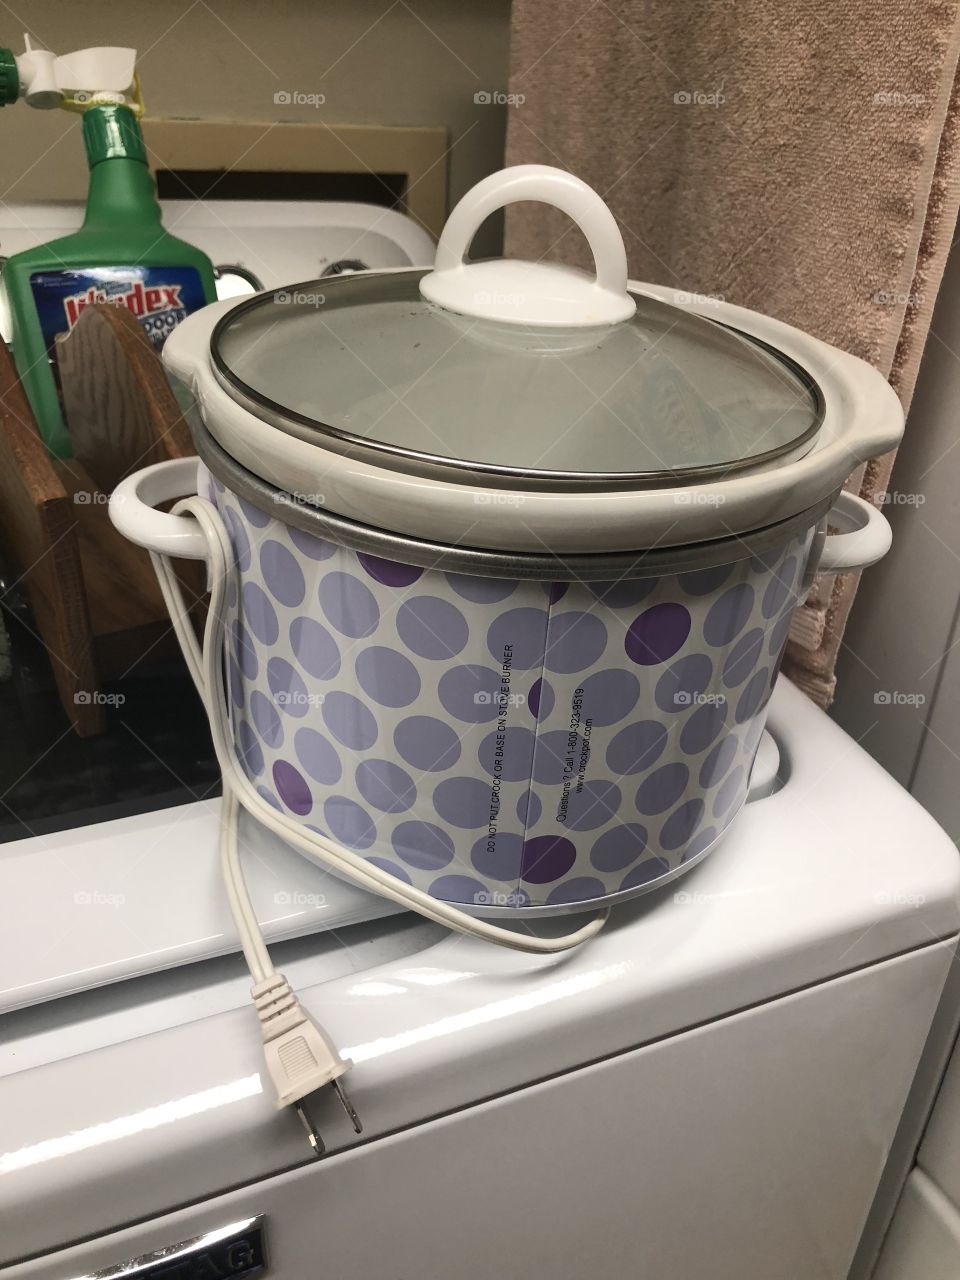 Nice small crockpot with life left in it.